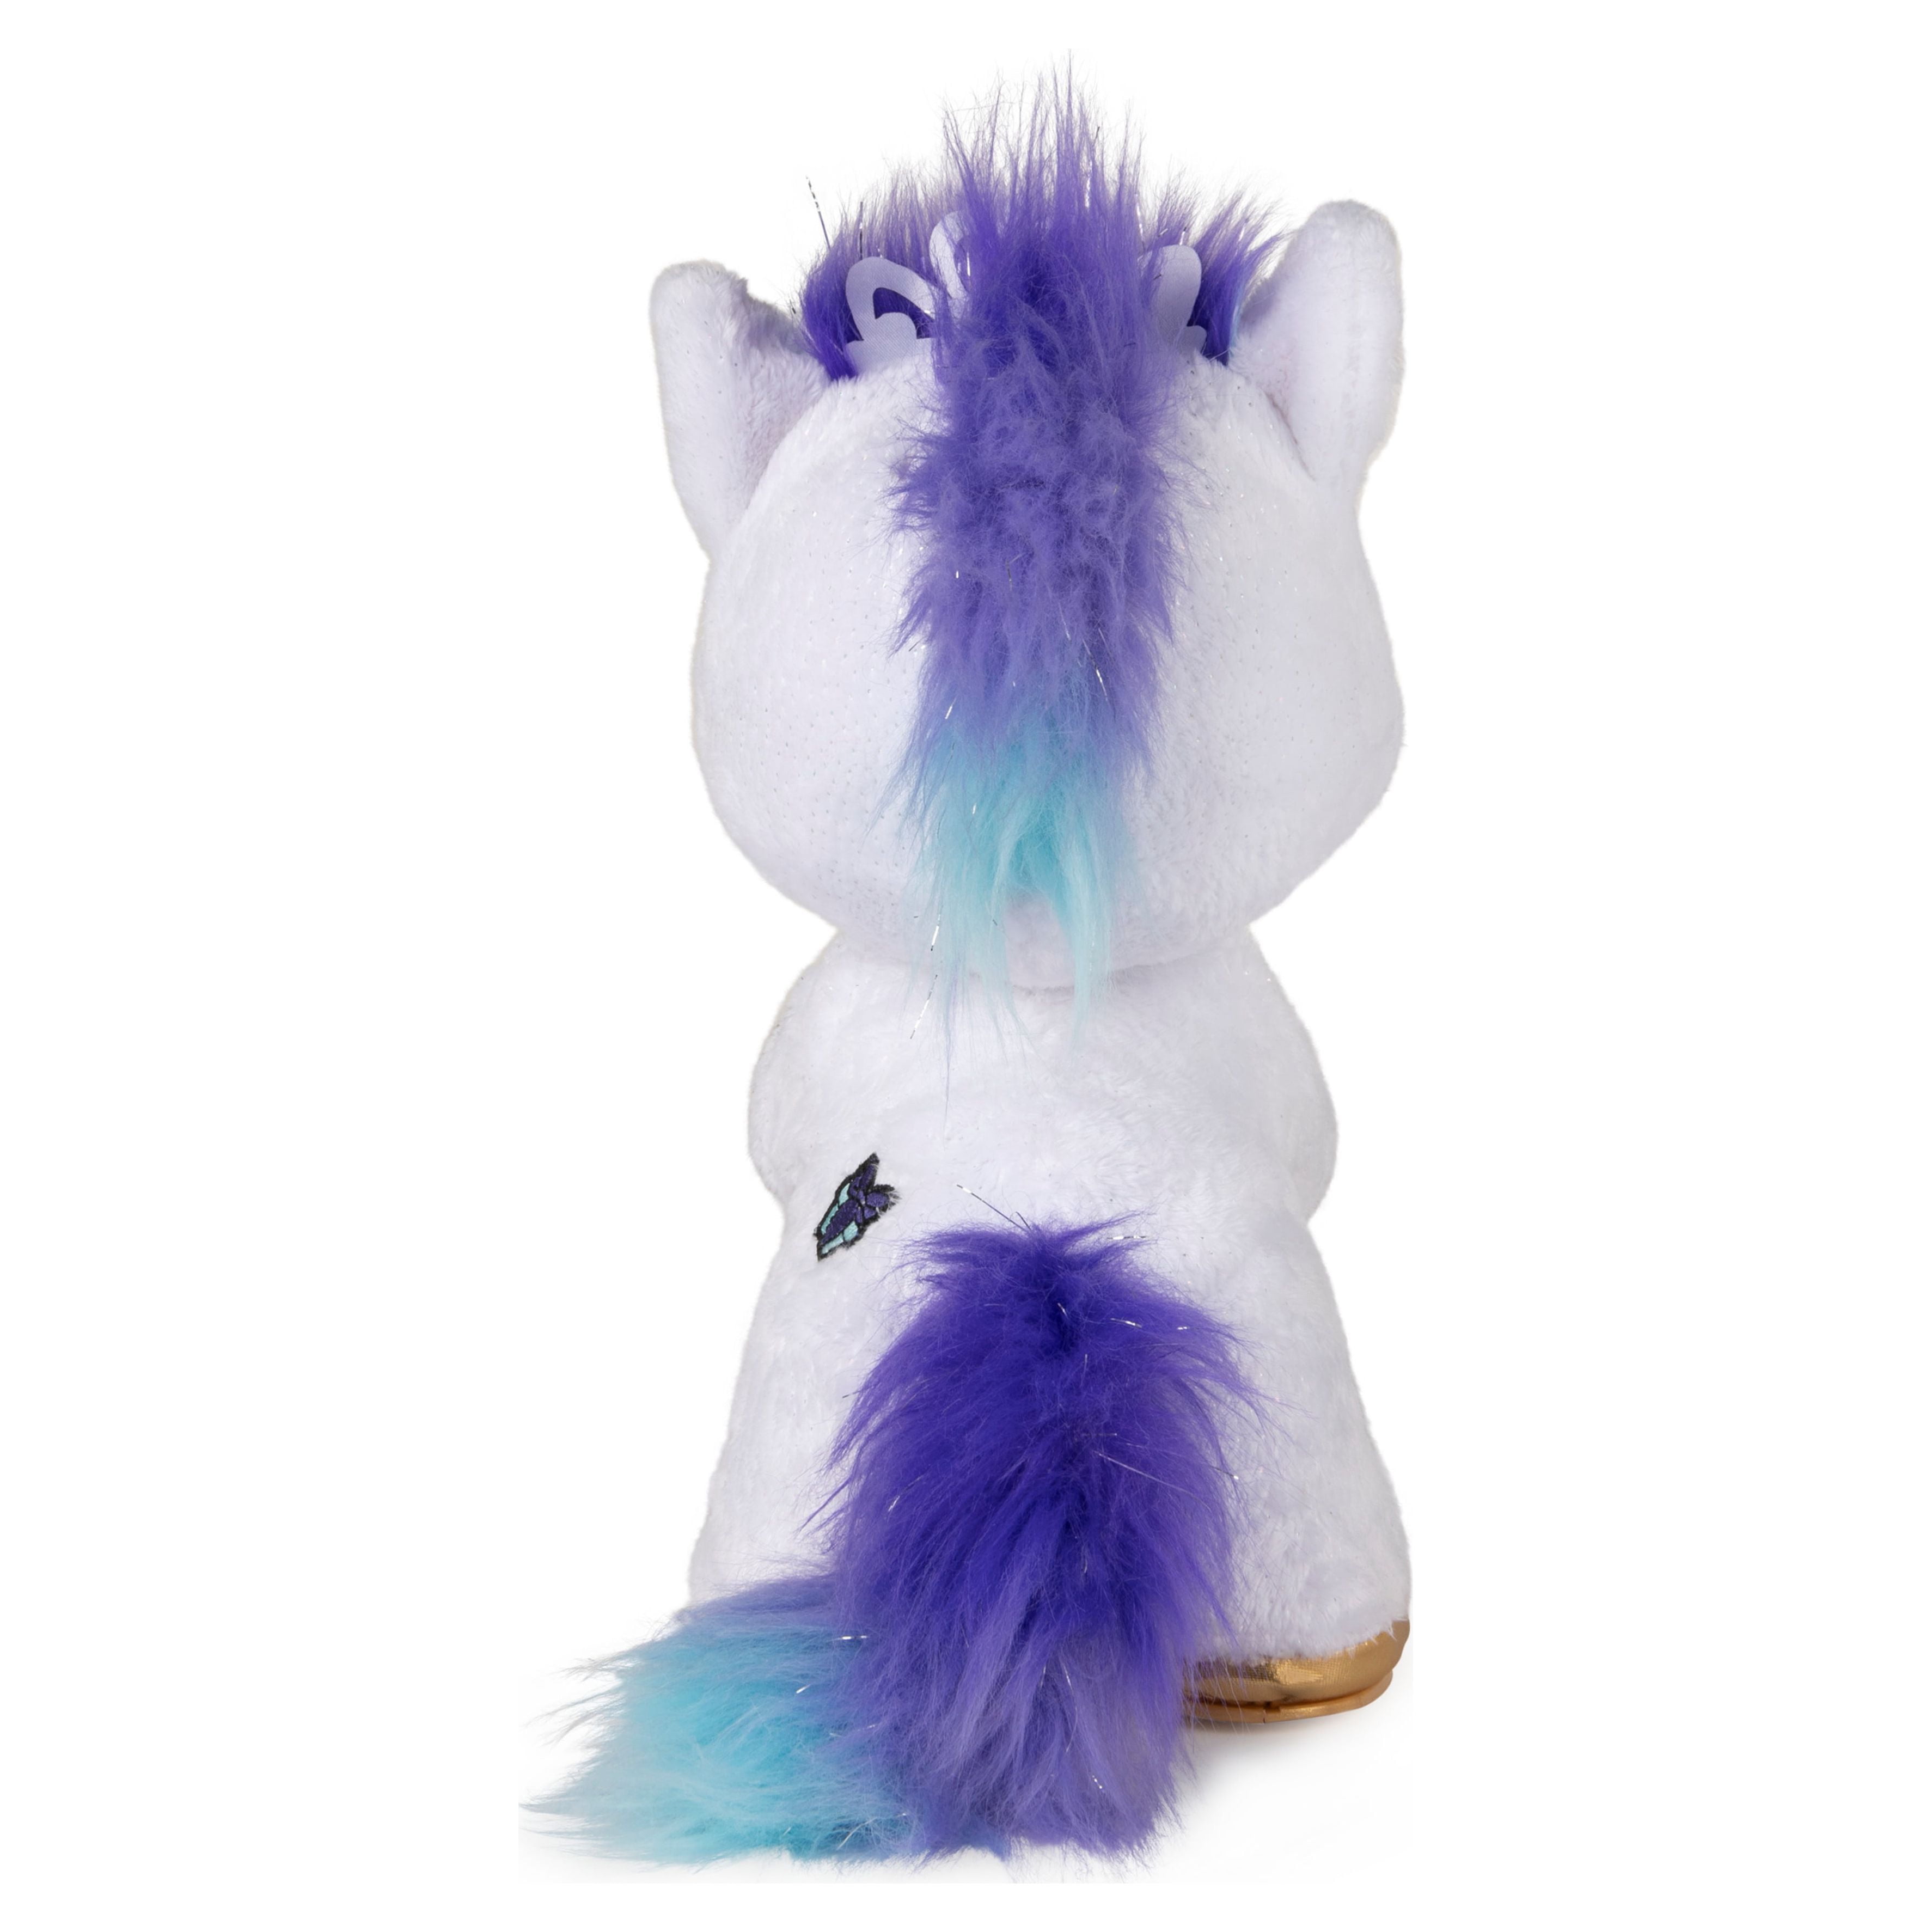 Present Pets Unicorn Walmart Exclusive! – Unboxing and How To Play